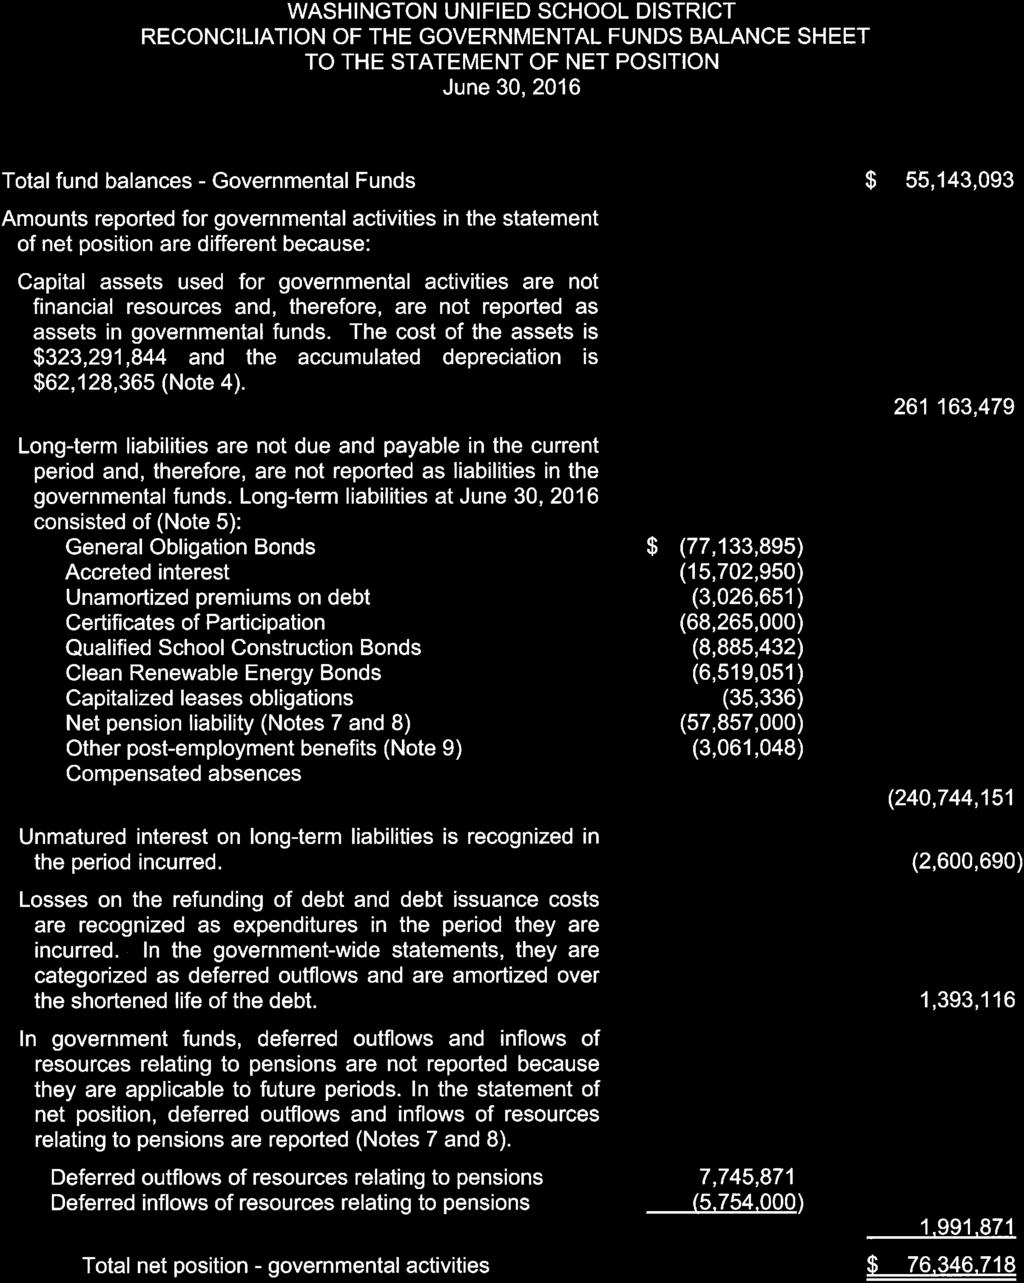 WASHINGTON UNIFIED SCHOOL DISTRICT RECONCILIATION OF THE GOVERNMENTAL FUNDS BALANCE SHEET TO THE STATEMENT OF NET POSITION June 30, 2016 Total fund balances - Governmental Funds $ 55,143,093 Amounts